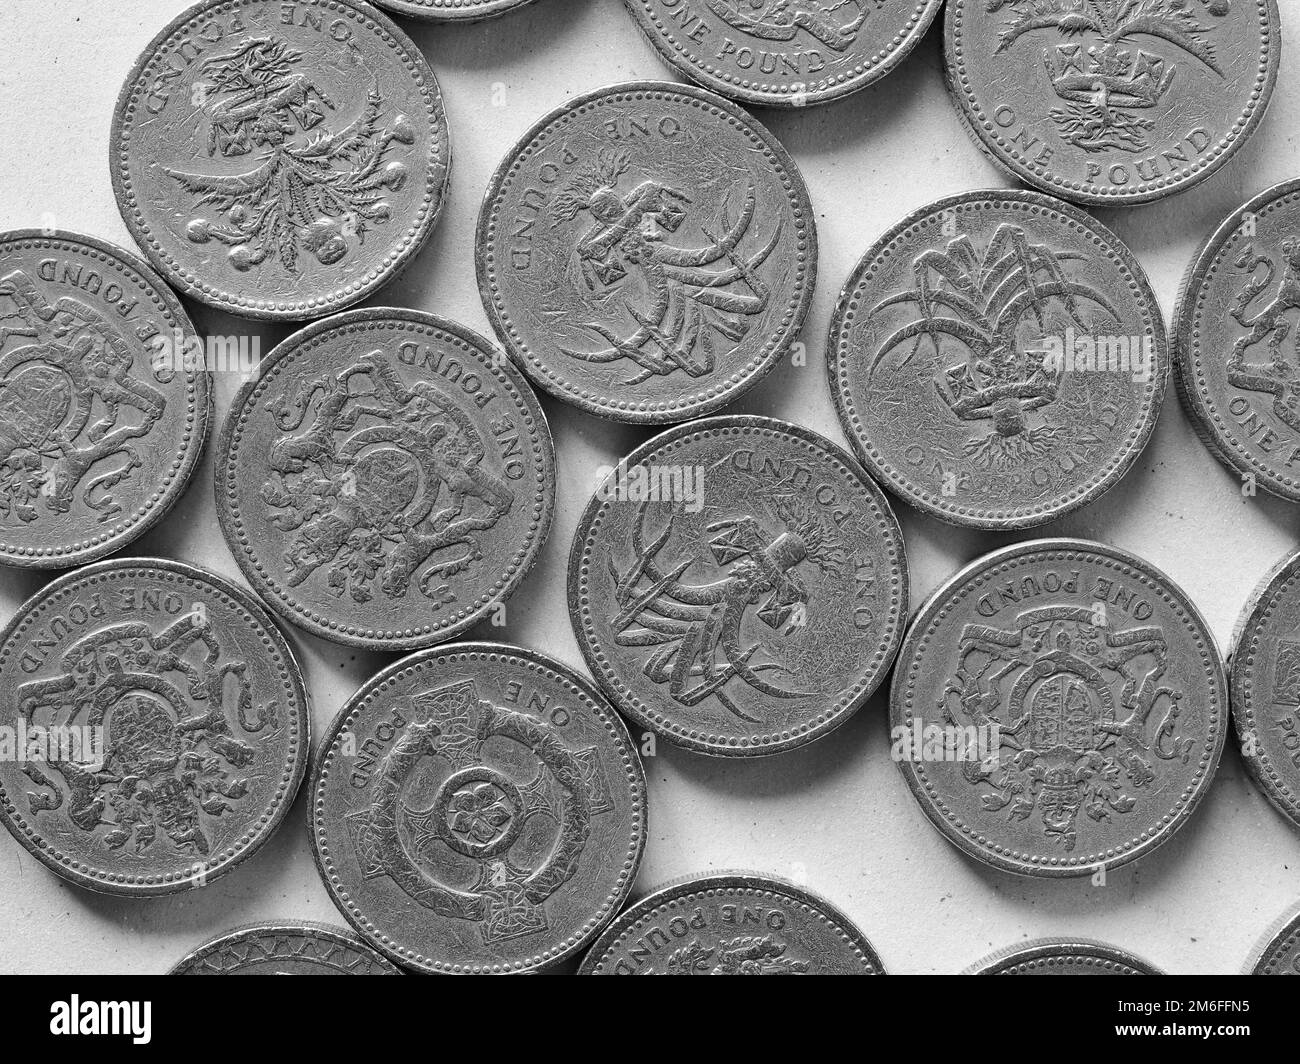 One Pound coins, United Kingdom in black and white Stock Photo